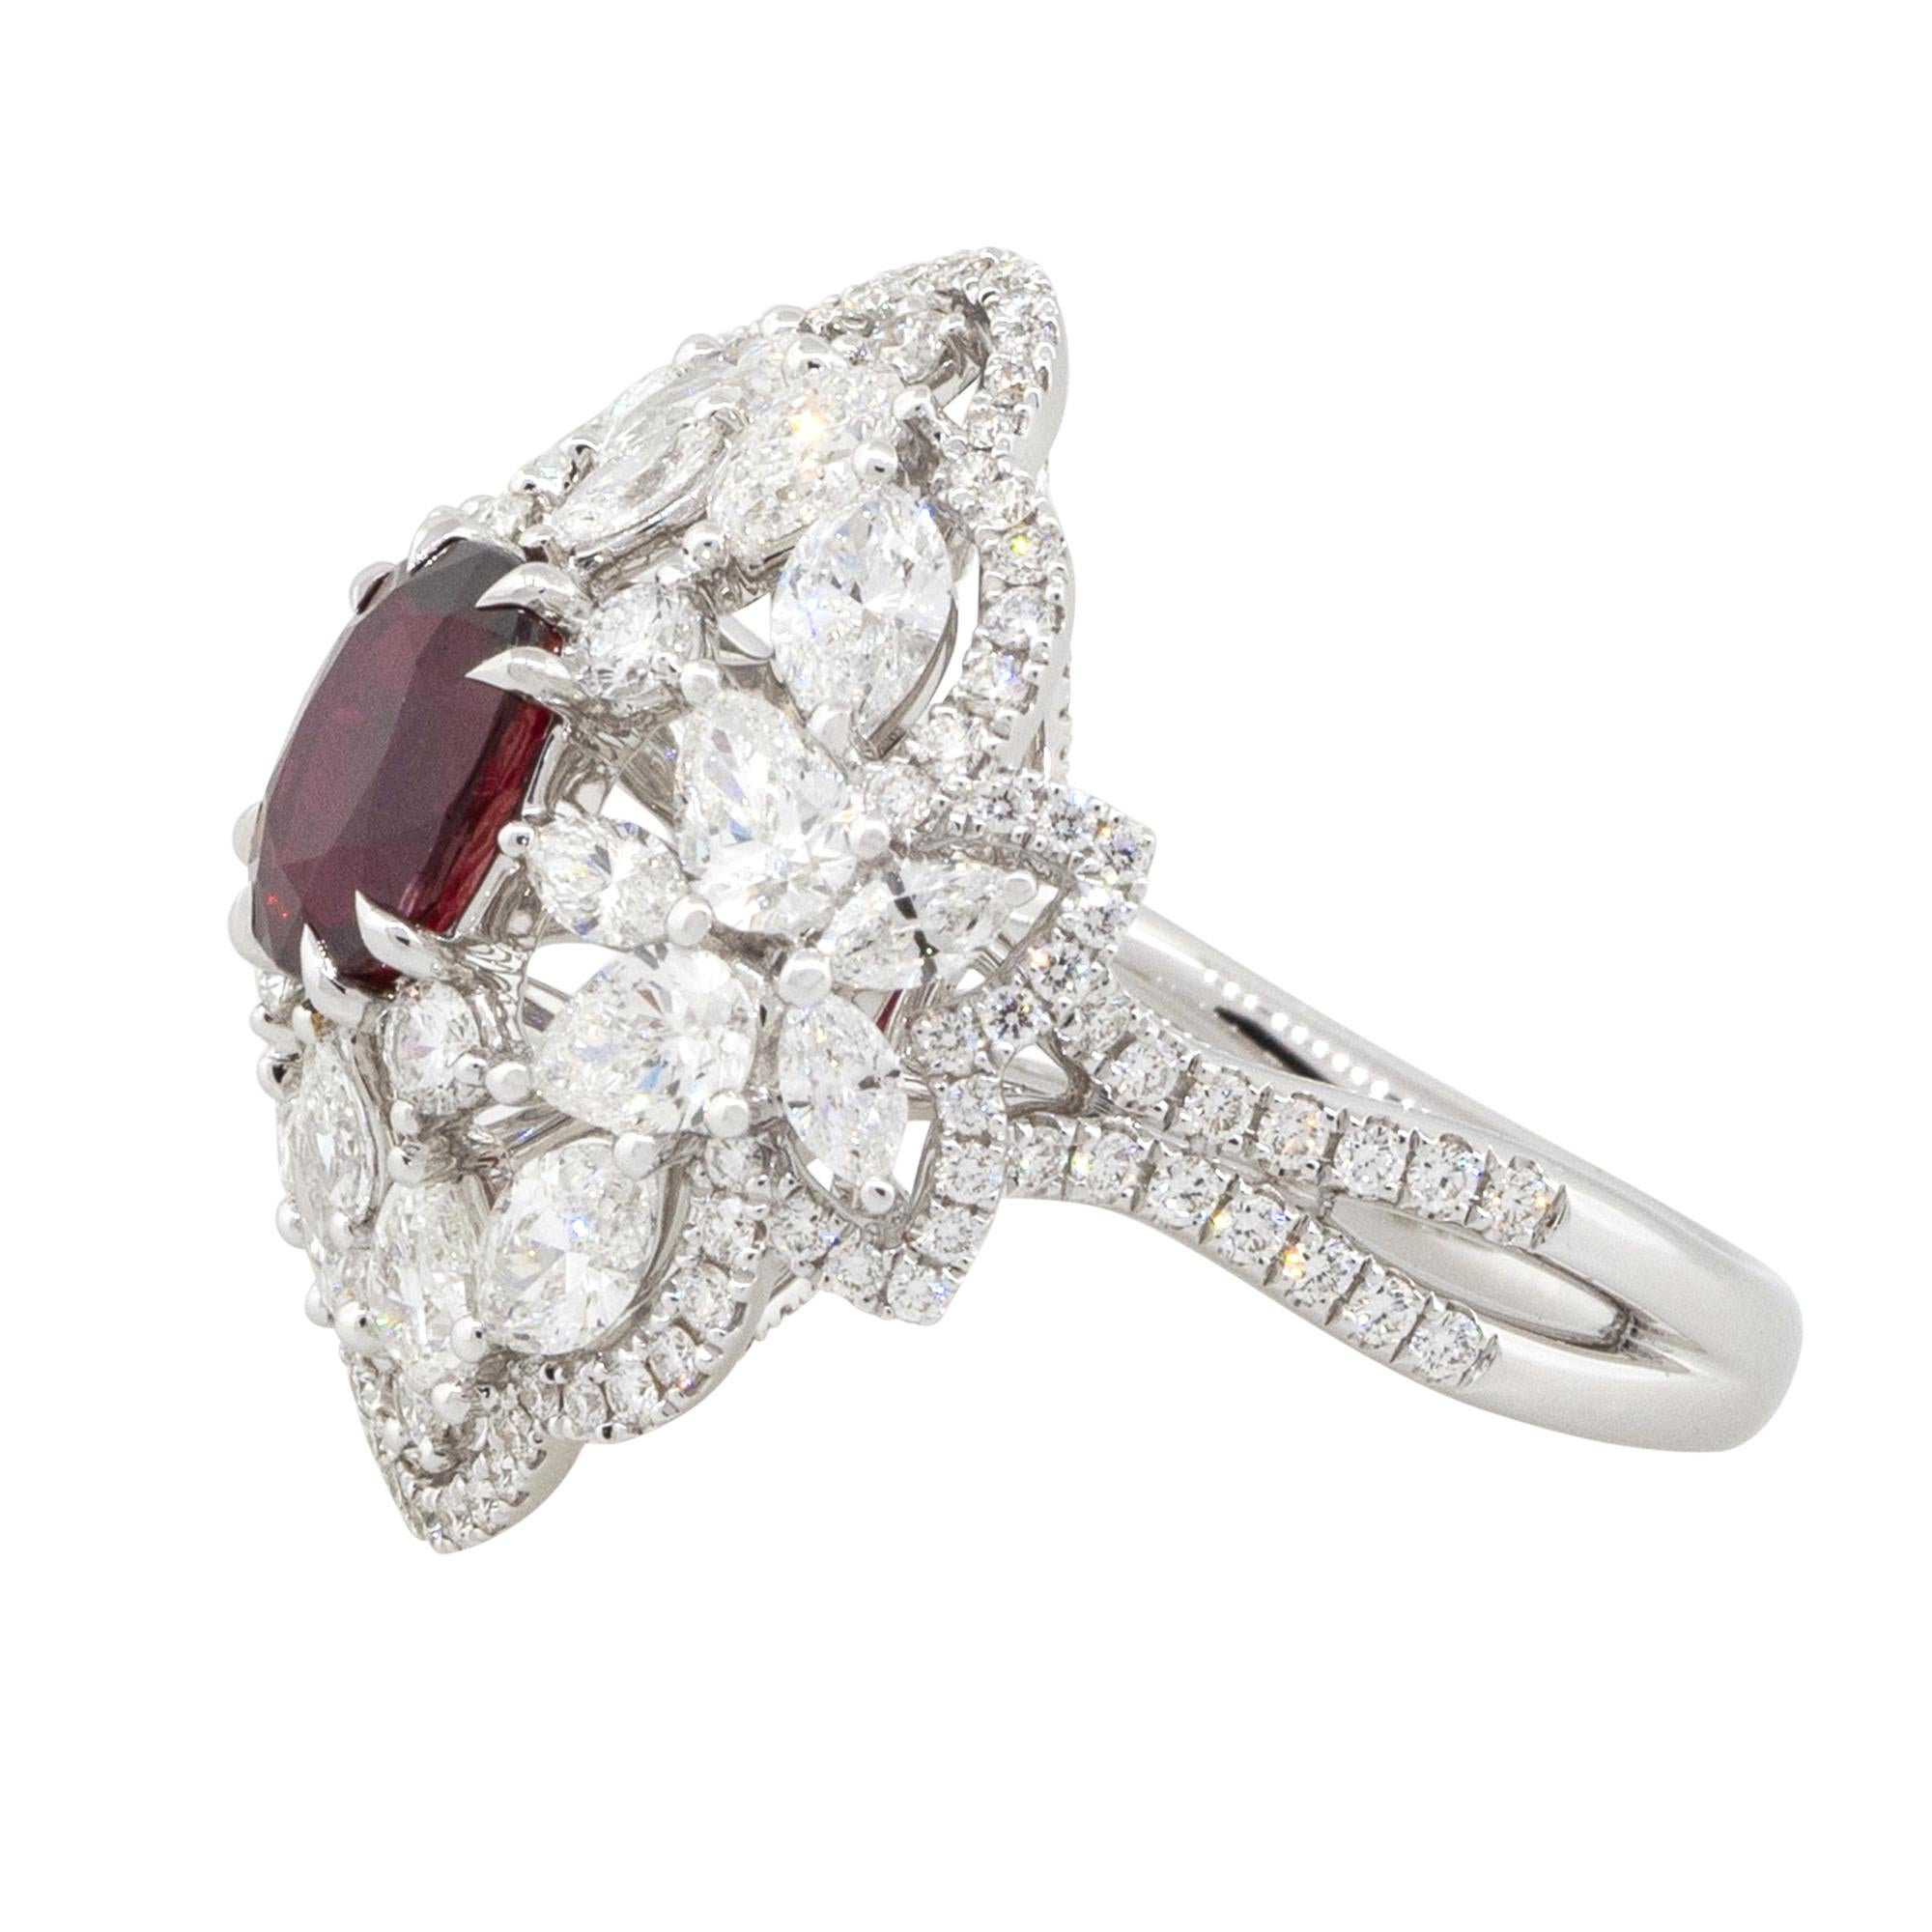 Material: 18k White Gold
Gemstone details: 2.53ct Oval Ruby center gemstones. Natural Ruby Vivid Red. No heat treatment. Origin: Mozambique. GRS: 2016-039408
Diamond details: Approx. 1.00ctw of round cut diamonds. Diamonds are G/H in color and VS in